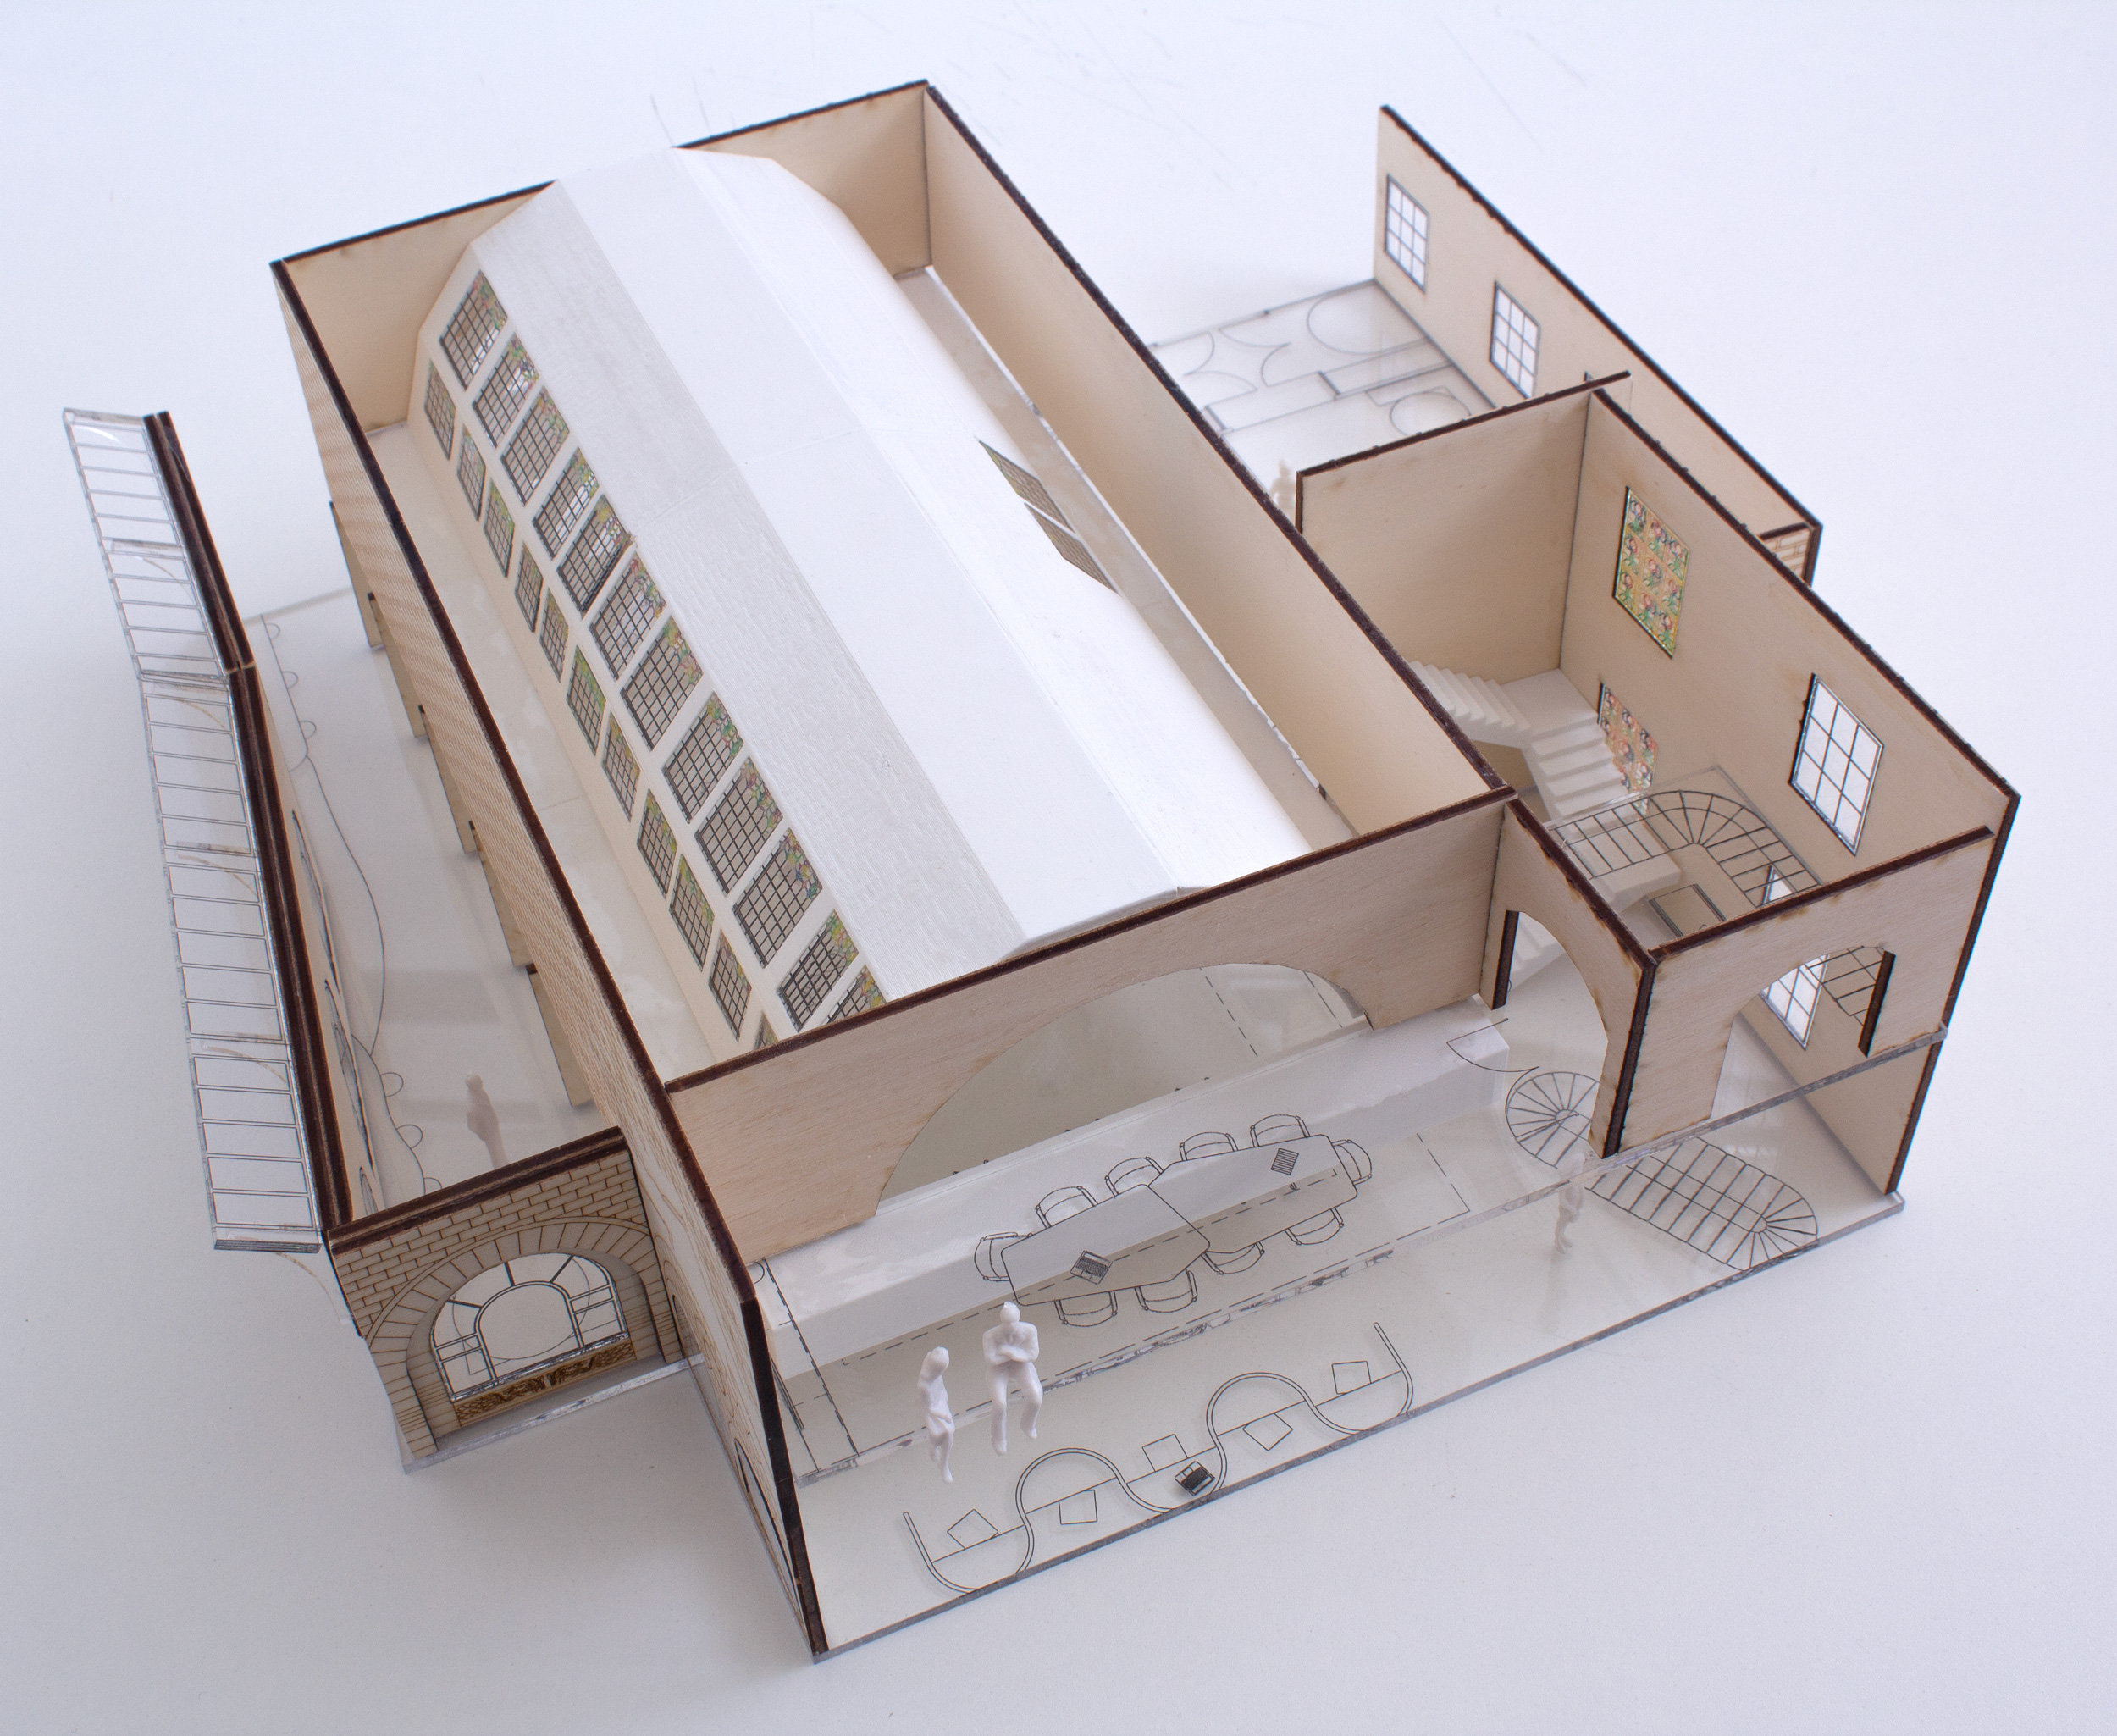 A photograph of a scale model made using laser-cut plywood, clear acrylic, and white 3D printed elements.